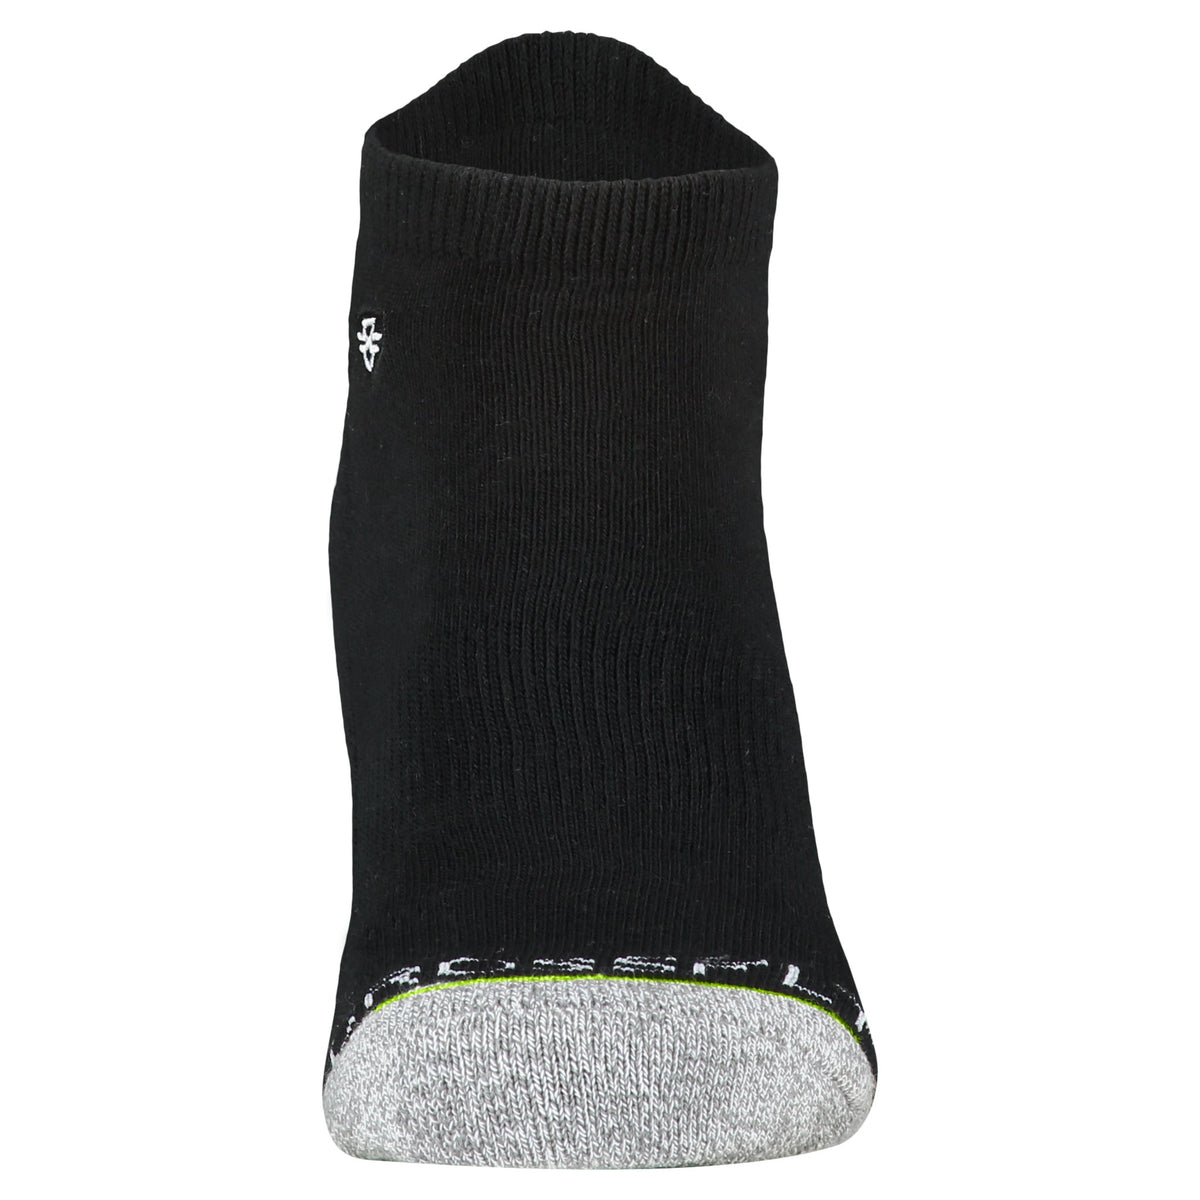 Crossfly men&#39;s Original Low Socks in black from the Everyday series, featuring Flat Toe Seams and 360 Hold.